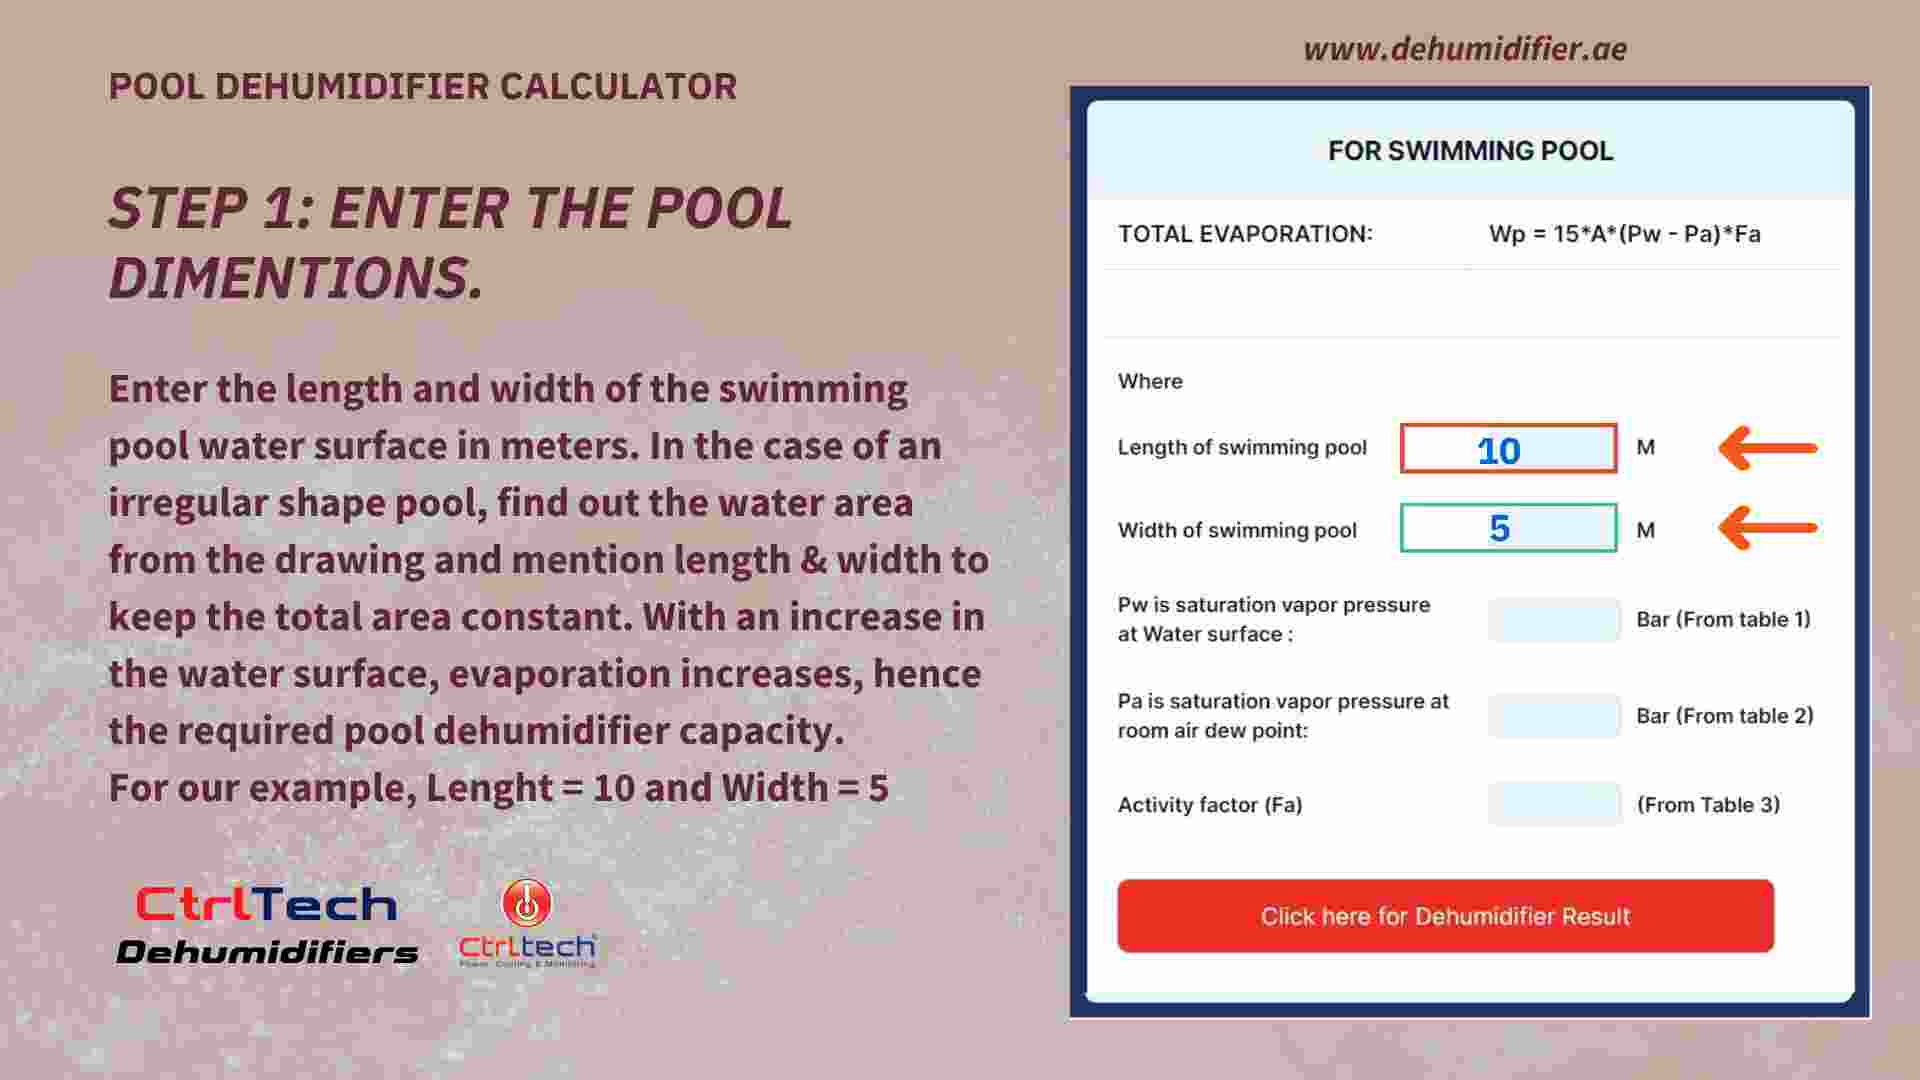 Step 1 - Enter indoor pool dimention for dehumidifier sizing.